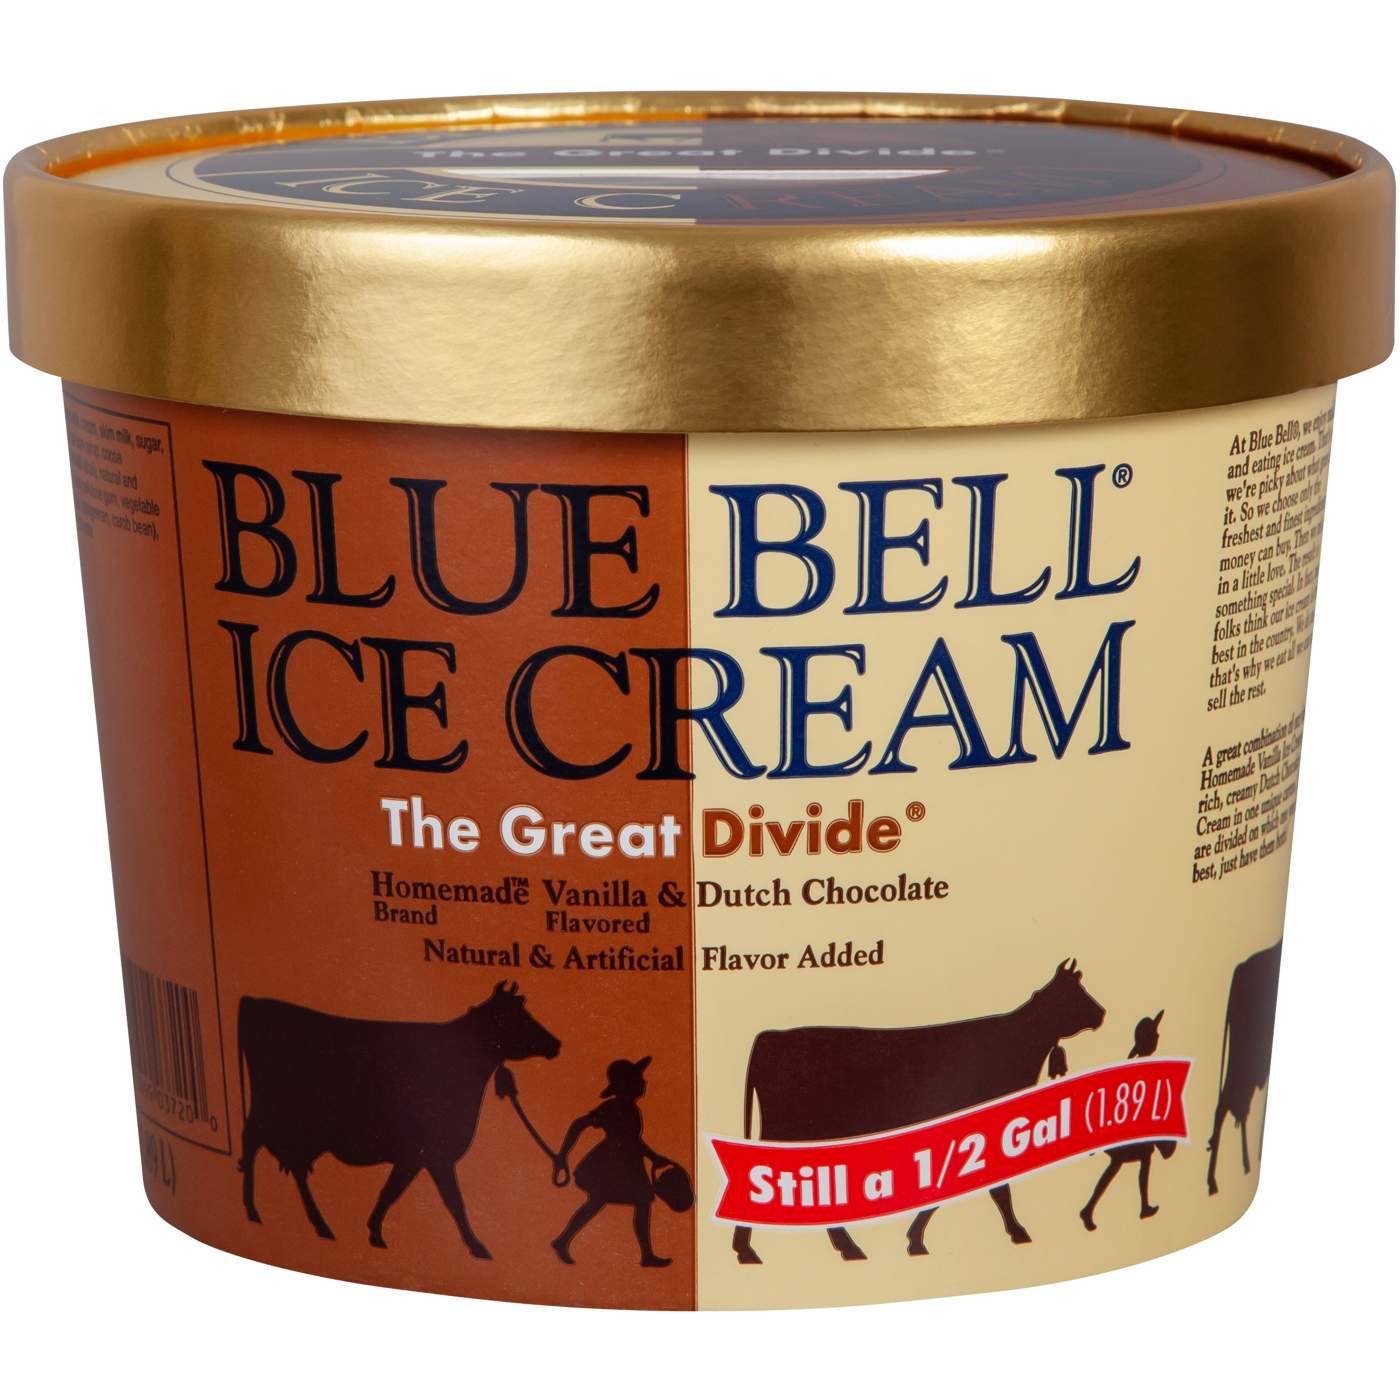 Blue Bell The Great Divide Ice Cream; image 1 of 2